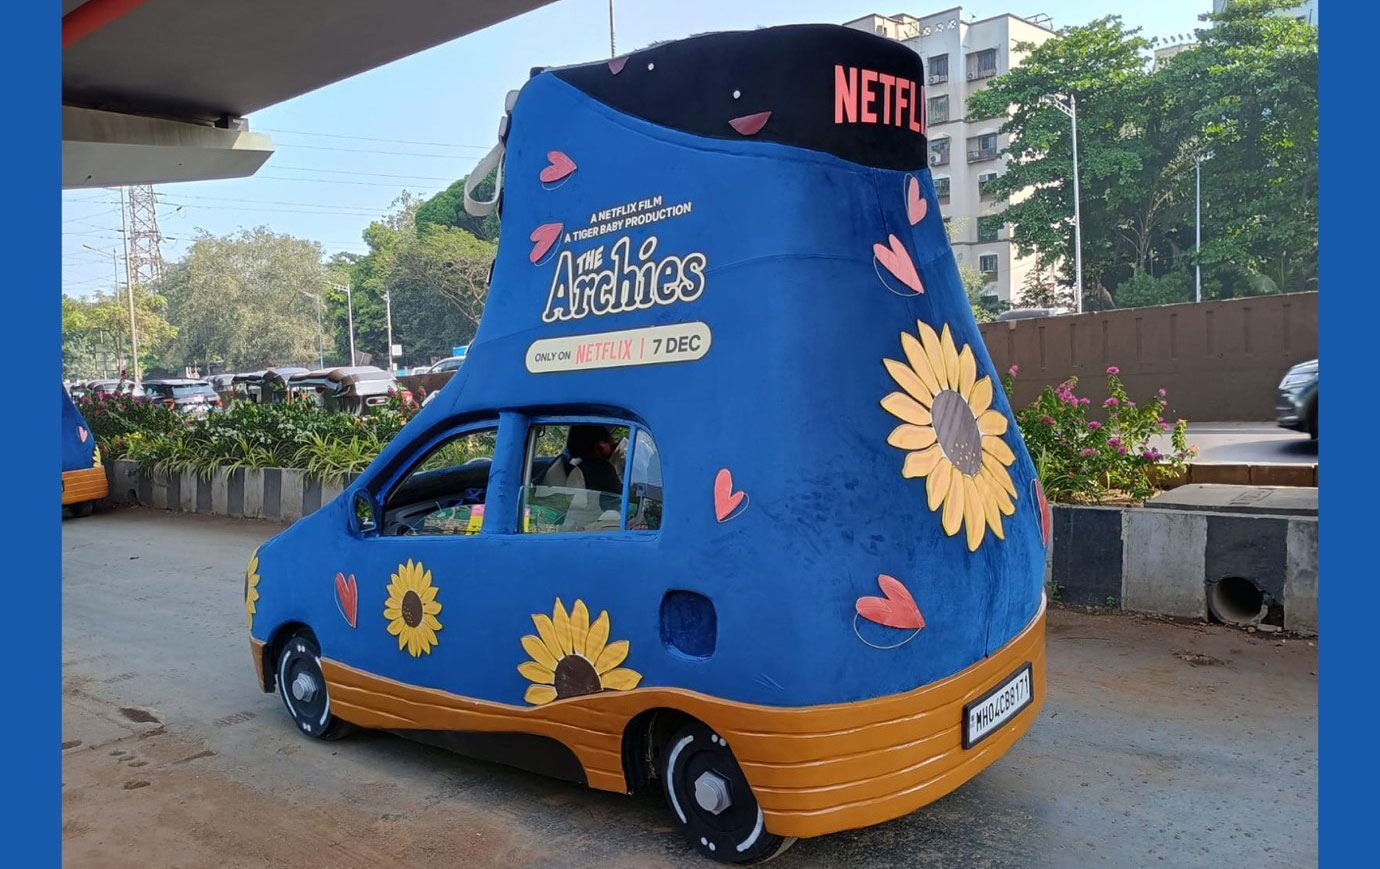 Netflix – The Archies Movie Promotion